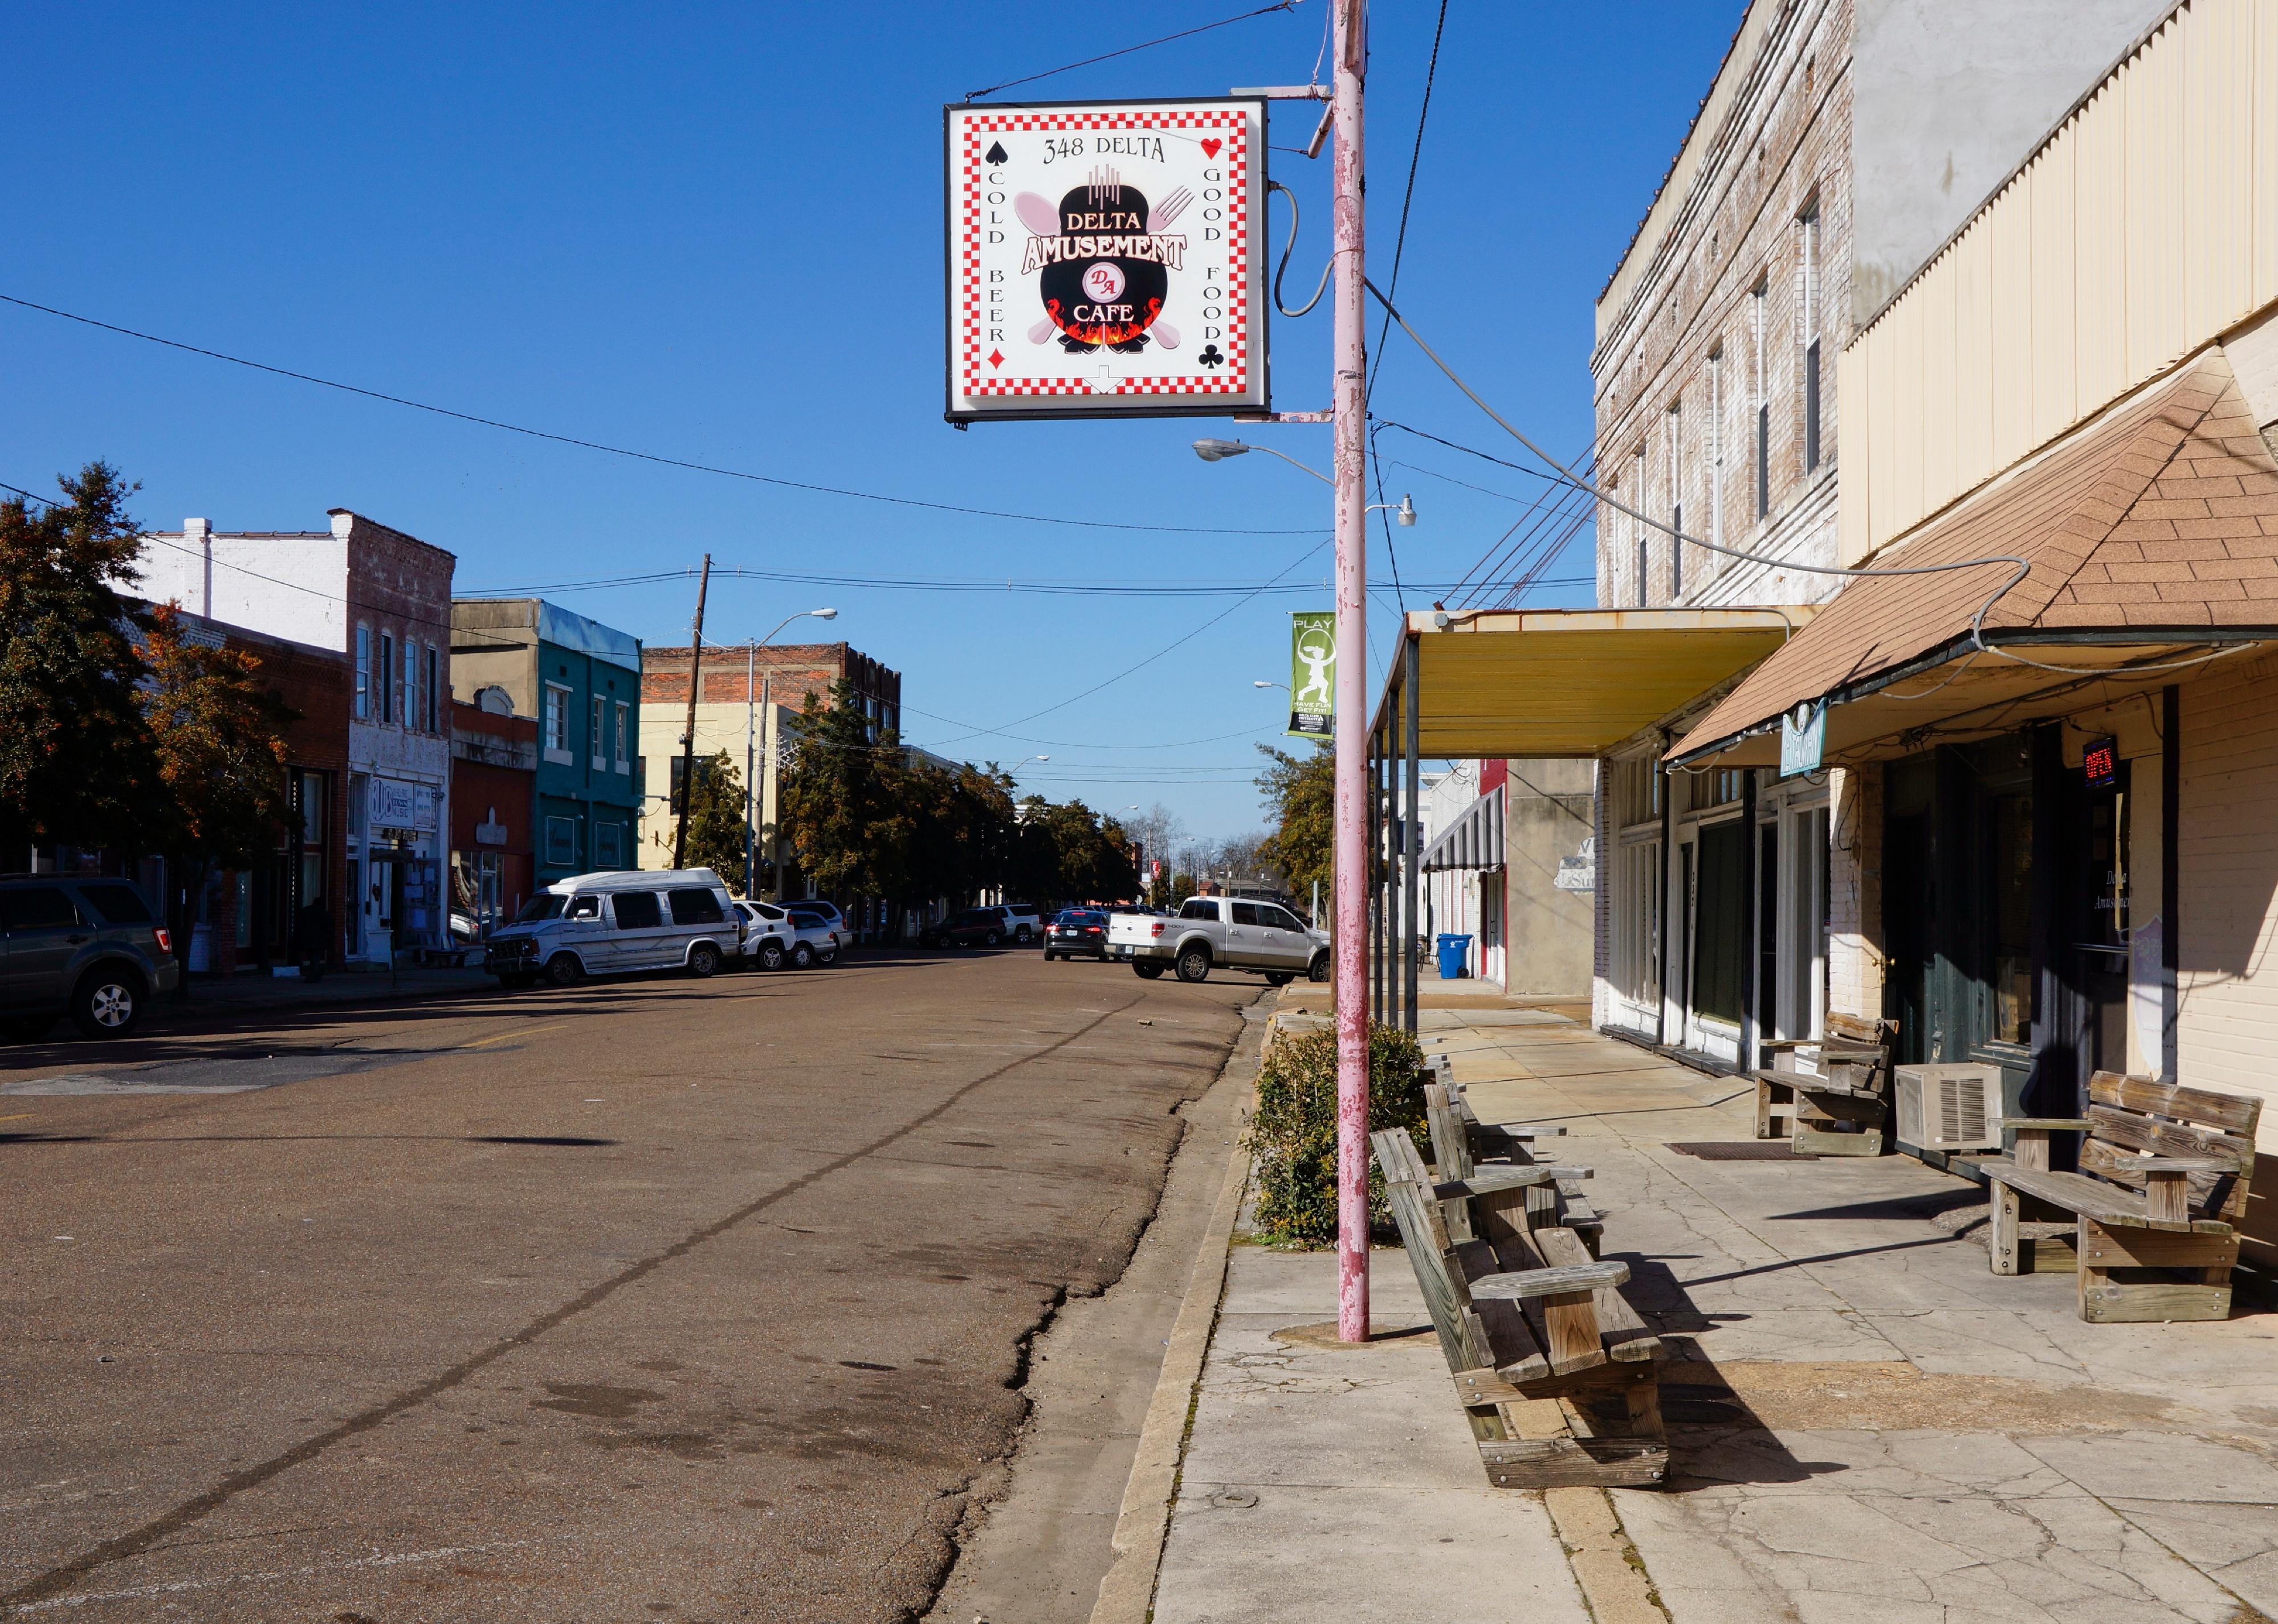 Downtown street in Clarksdale, Mississippi.